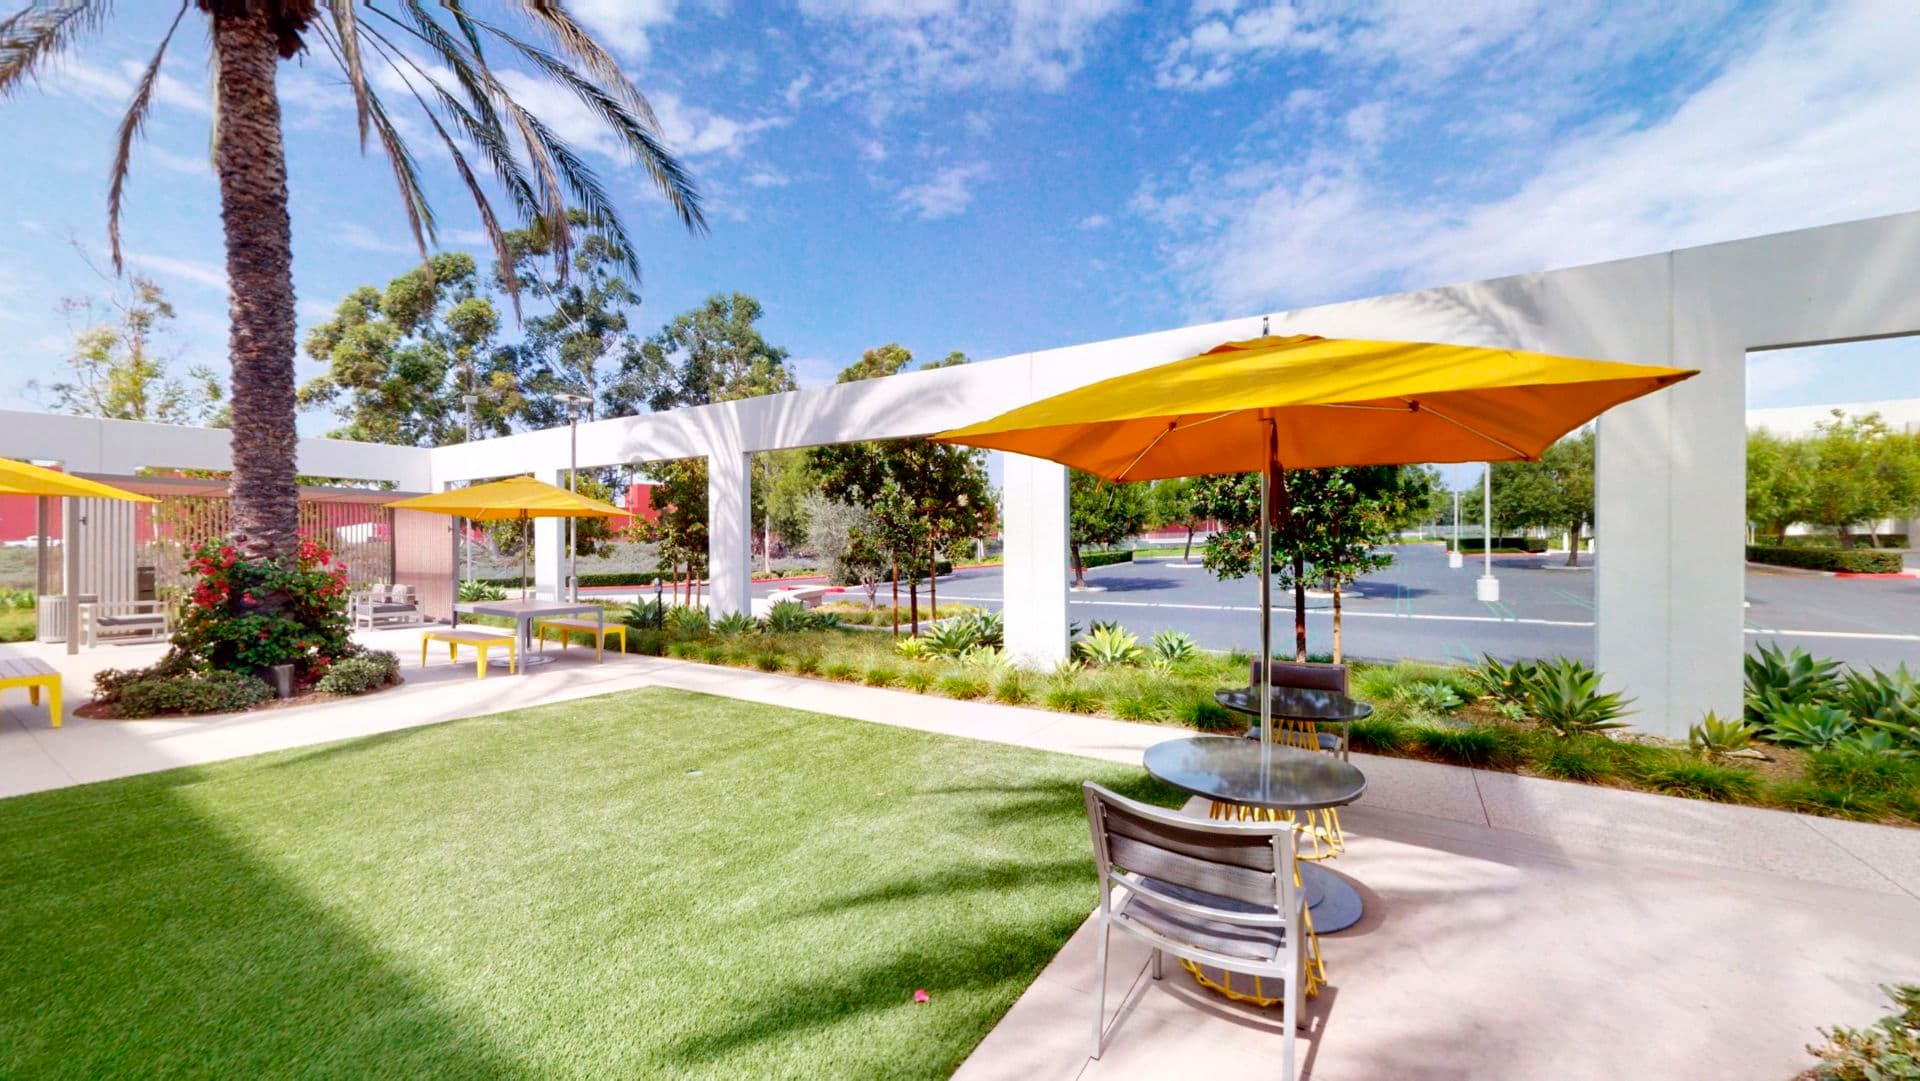 Exterior photography of Outdoor Workspace at 3210 El Camino Real at Market Place Center, Irvine CA.